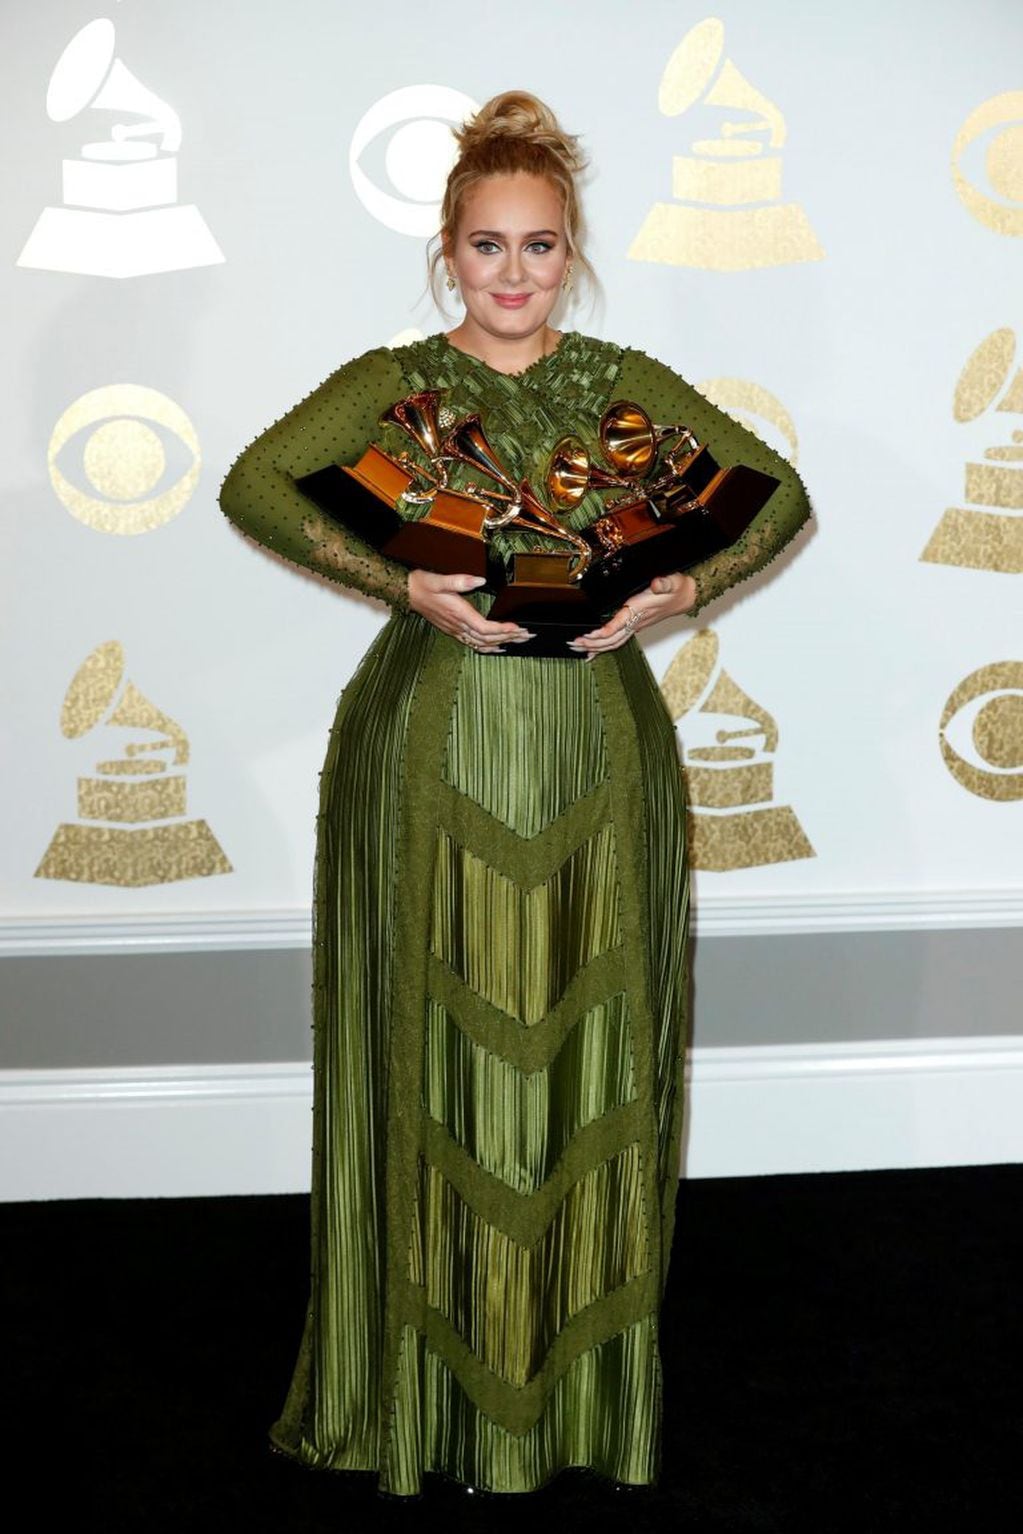 JGM167. Los Angeles (United States), 13/02/2017.- Adele holds up her awards in the press room during the 59th annual Grammy Awards ceremony at the Staples Center in Los Angeles, California, USA, 12 February 2017. Adele won the awards Record Of The Year, A